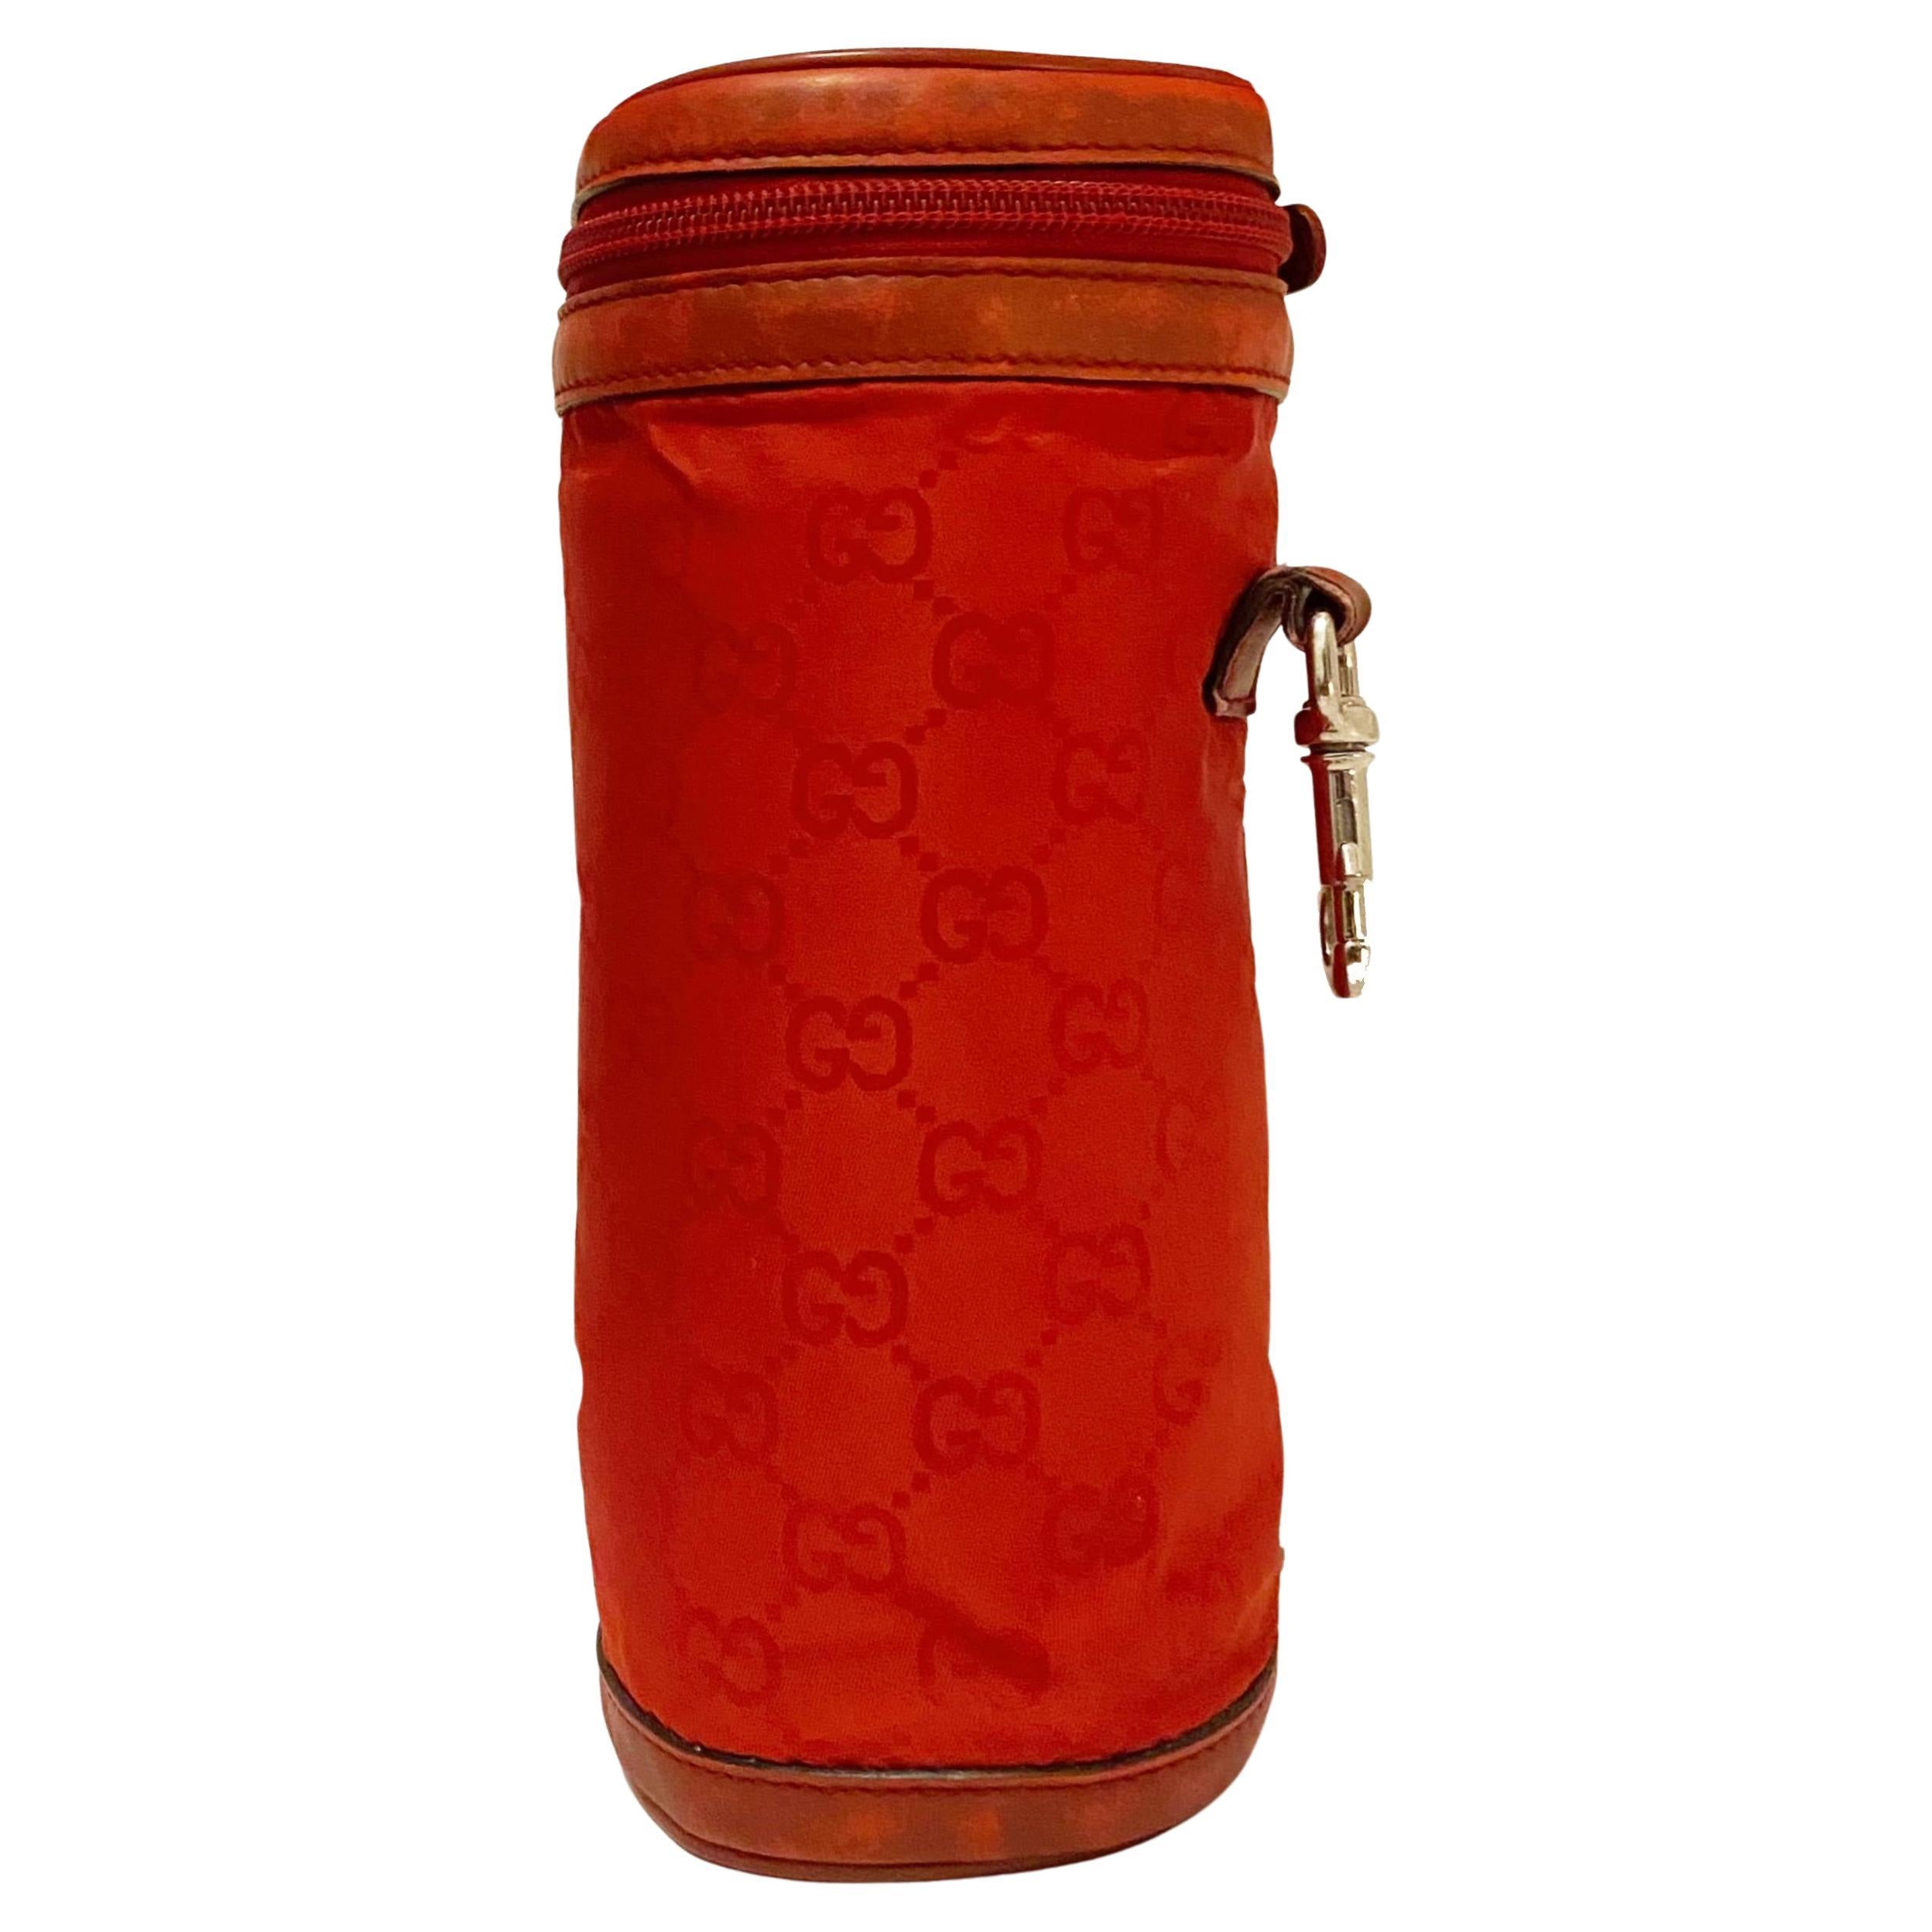 This exquisite Gucci Bottle Holder has been crafted with sophisticated elegance and luxury in mind. Intended to securely carry a bottle, but with the versatility to also serve as a petite purse, its handsome monogrammed exterior in classic red is